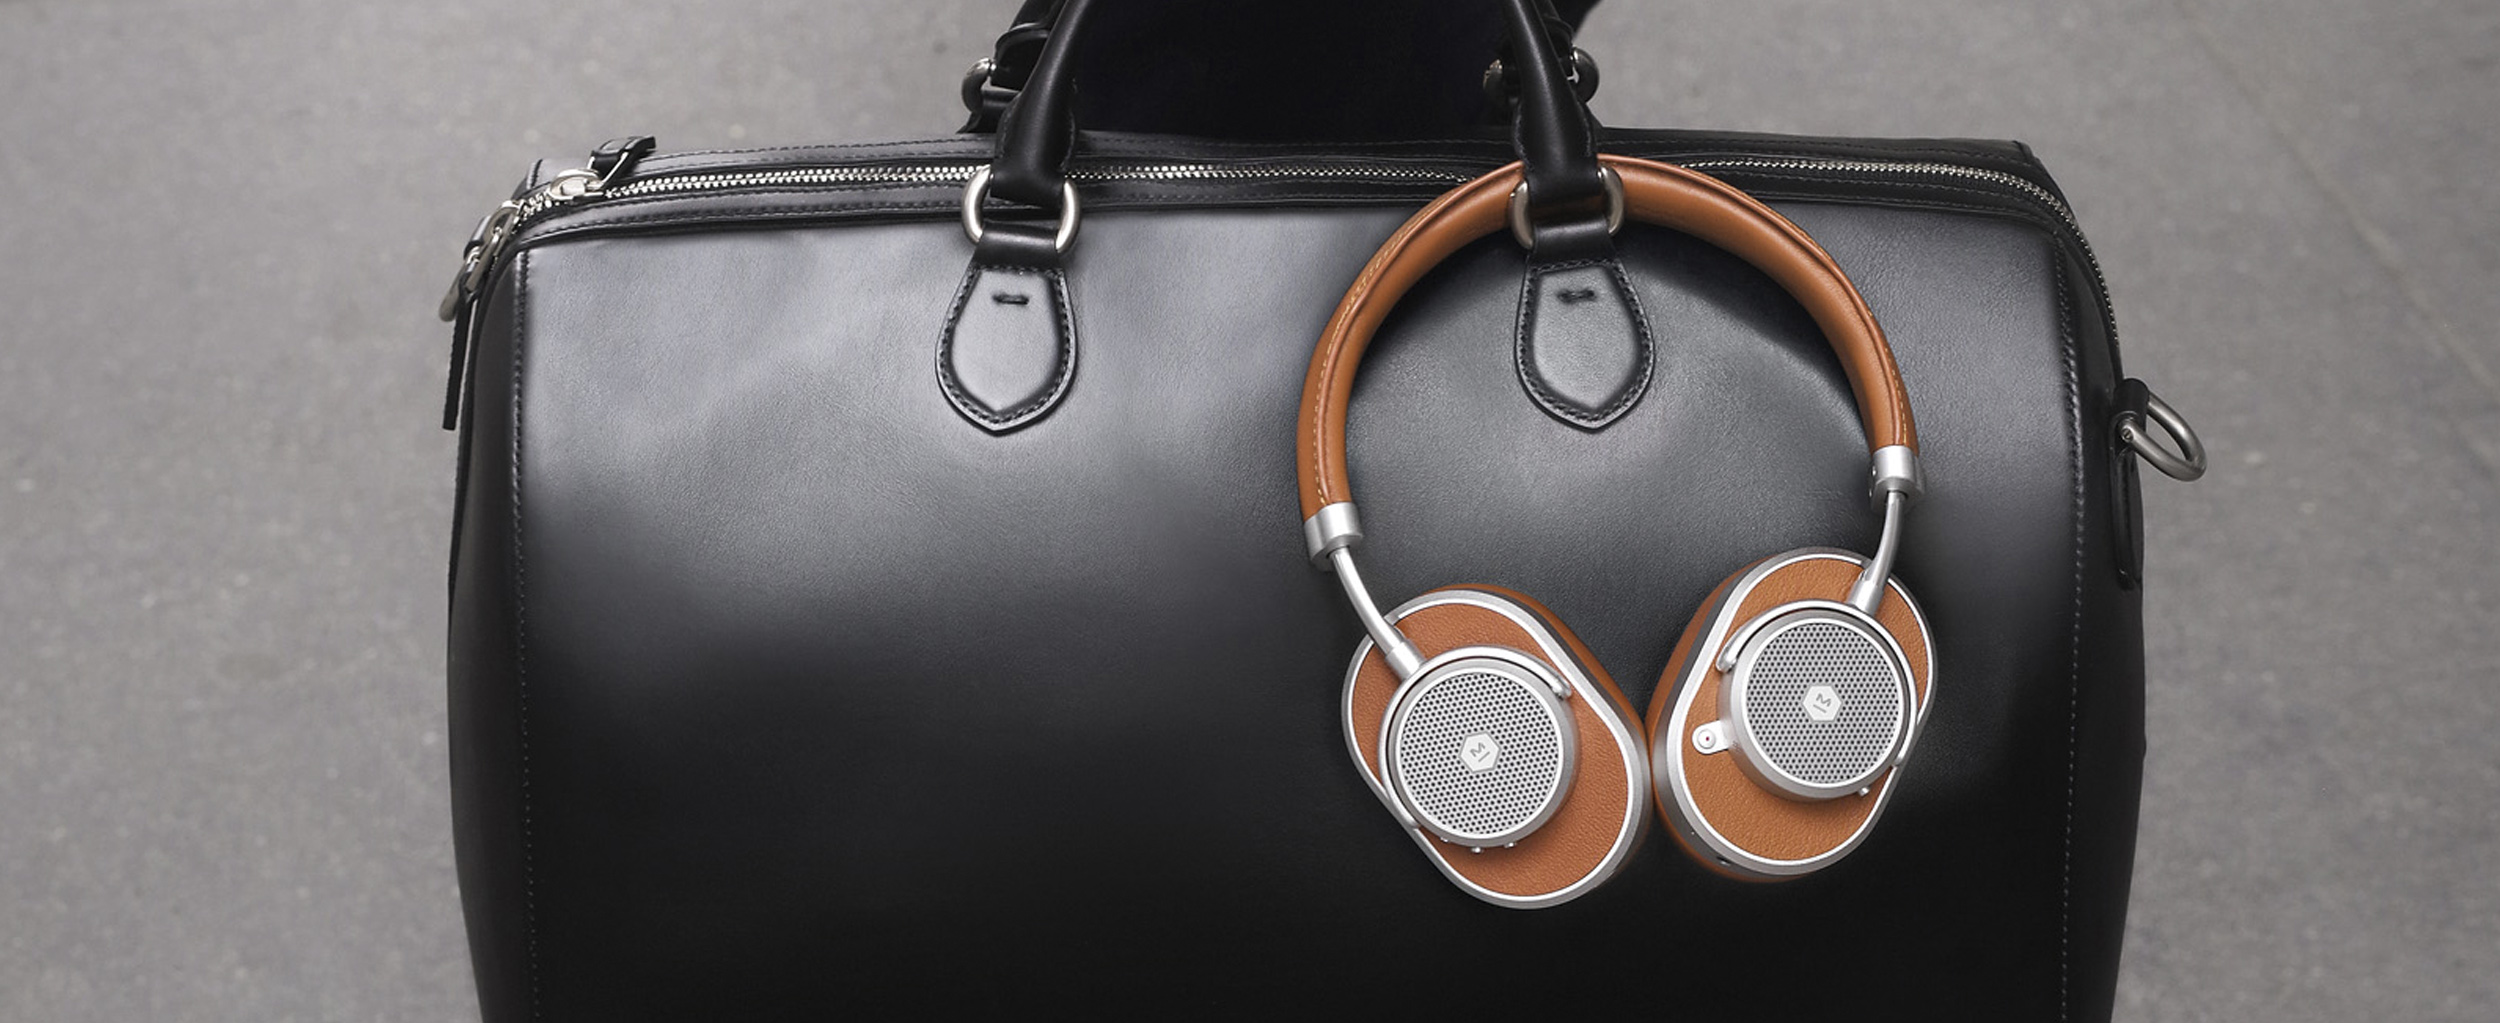 Gifts For Travelers 2020: Shop Travel Headphones For The Holidays